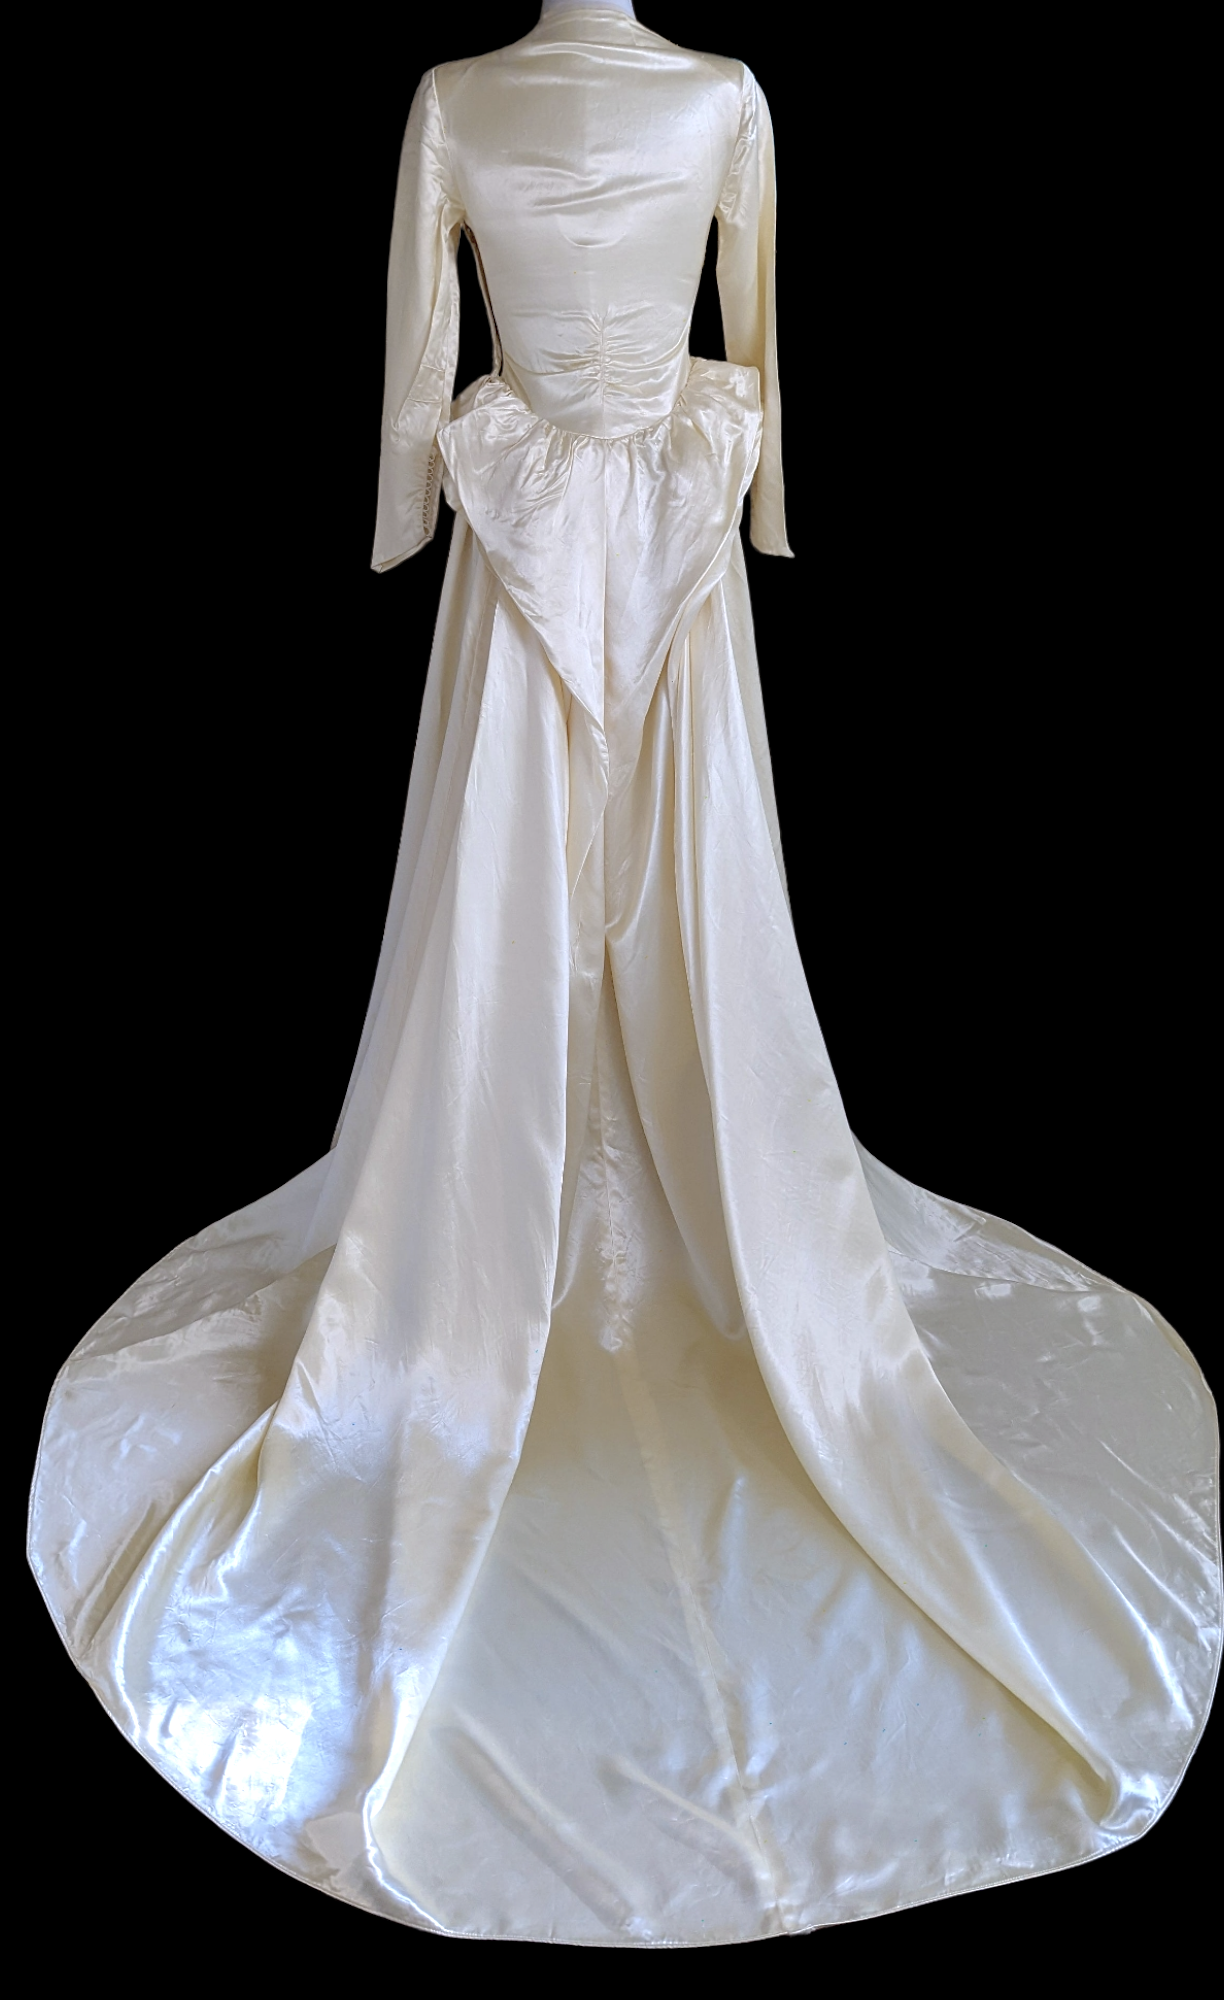 1940s Princess Style Liquid Satin Wedding Dress in Warm Candlelight Ivory White with Queen Anne Neckline, Cathedral Train and Detailed Pleated Bustle